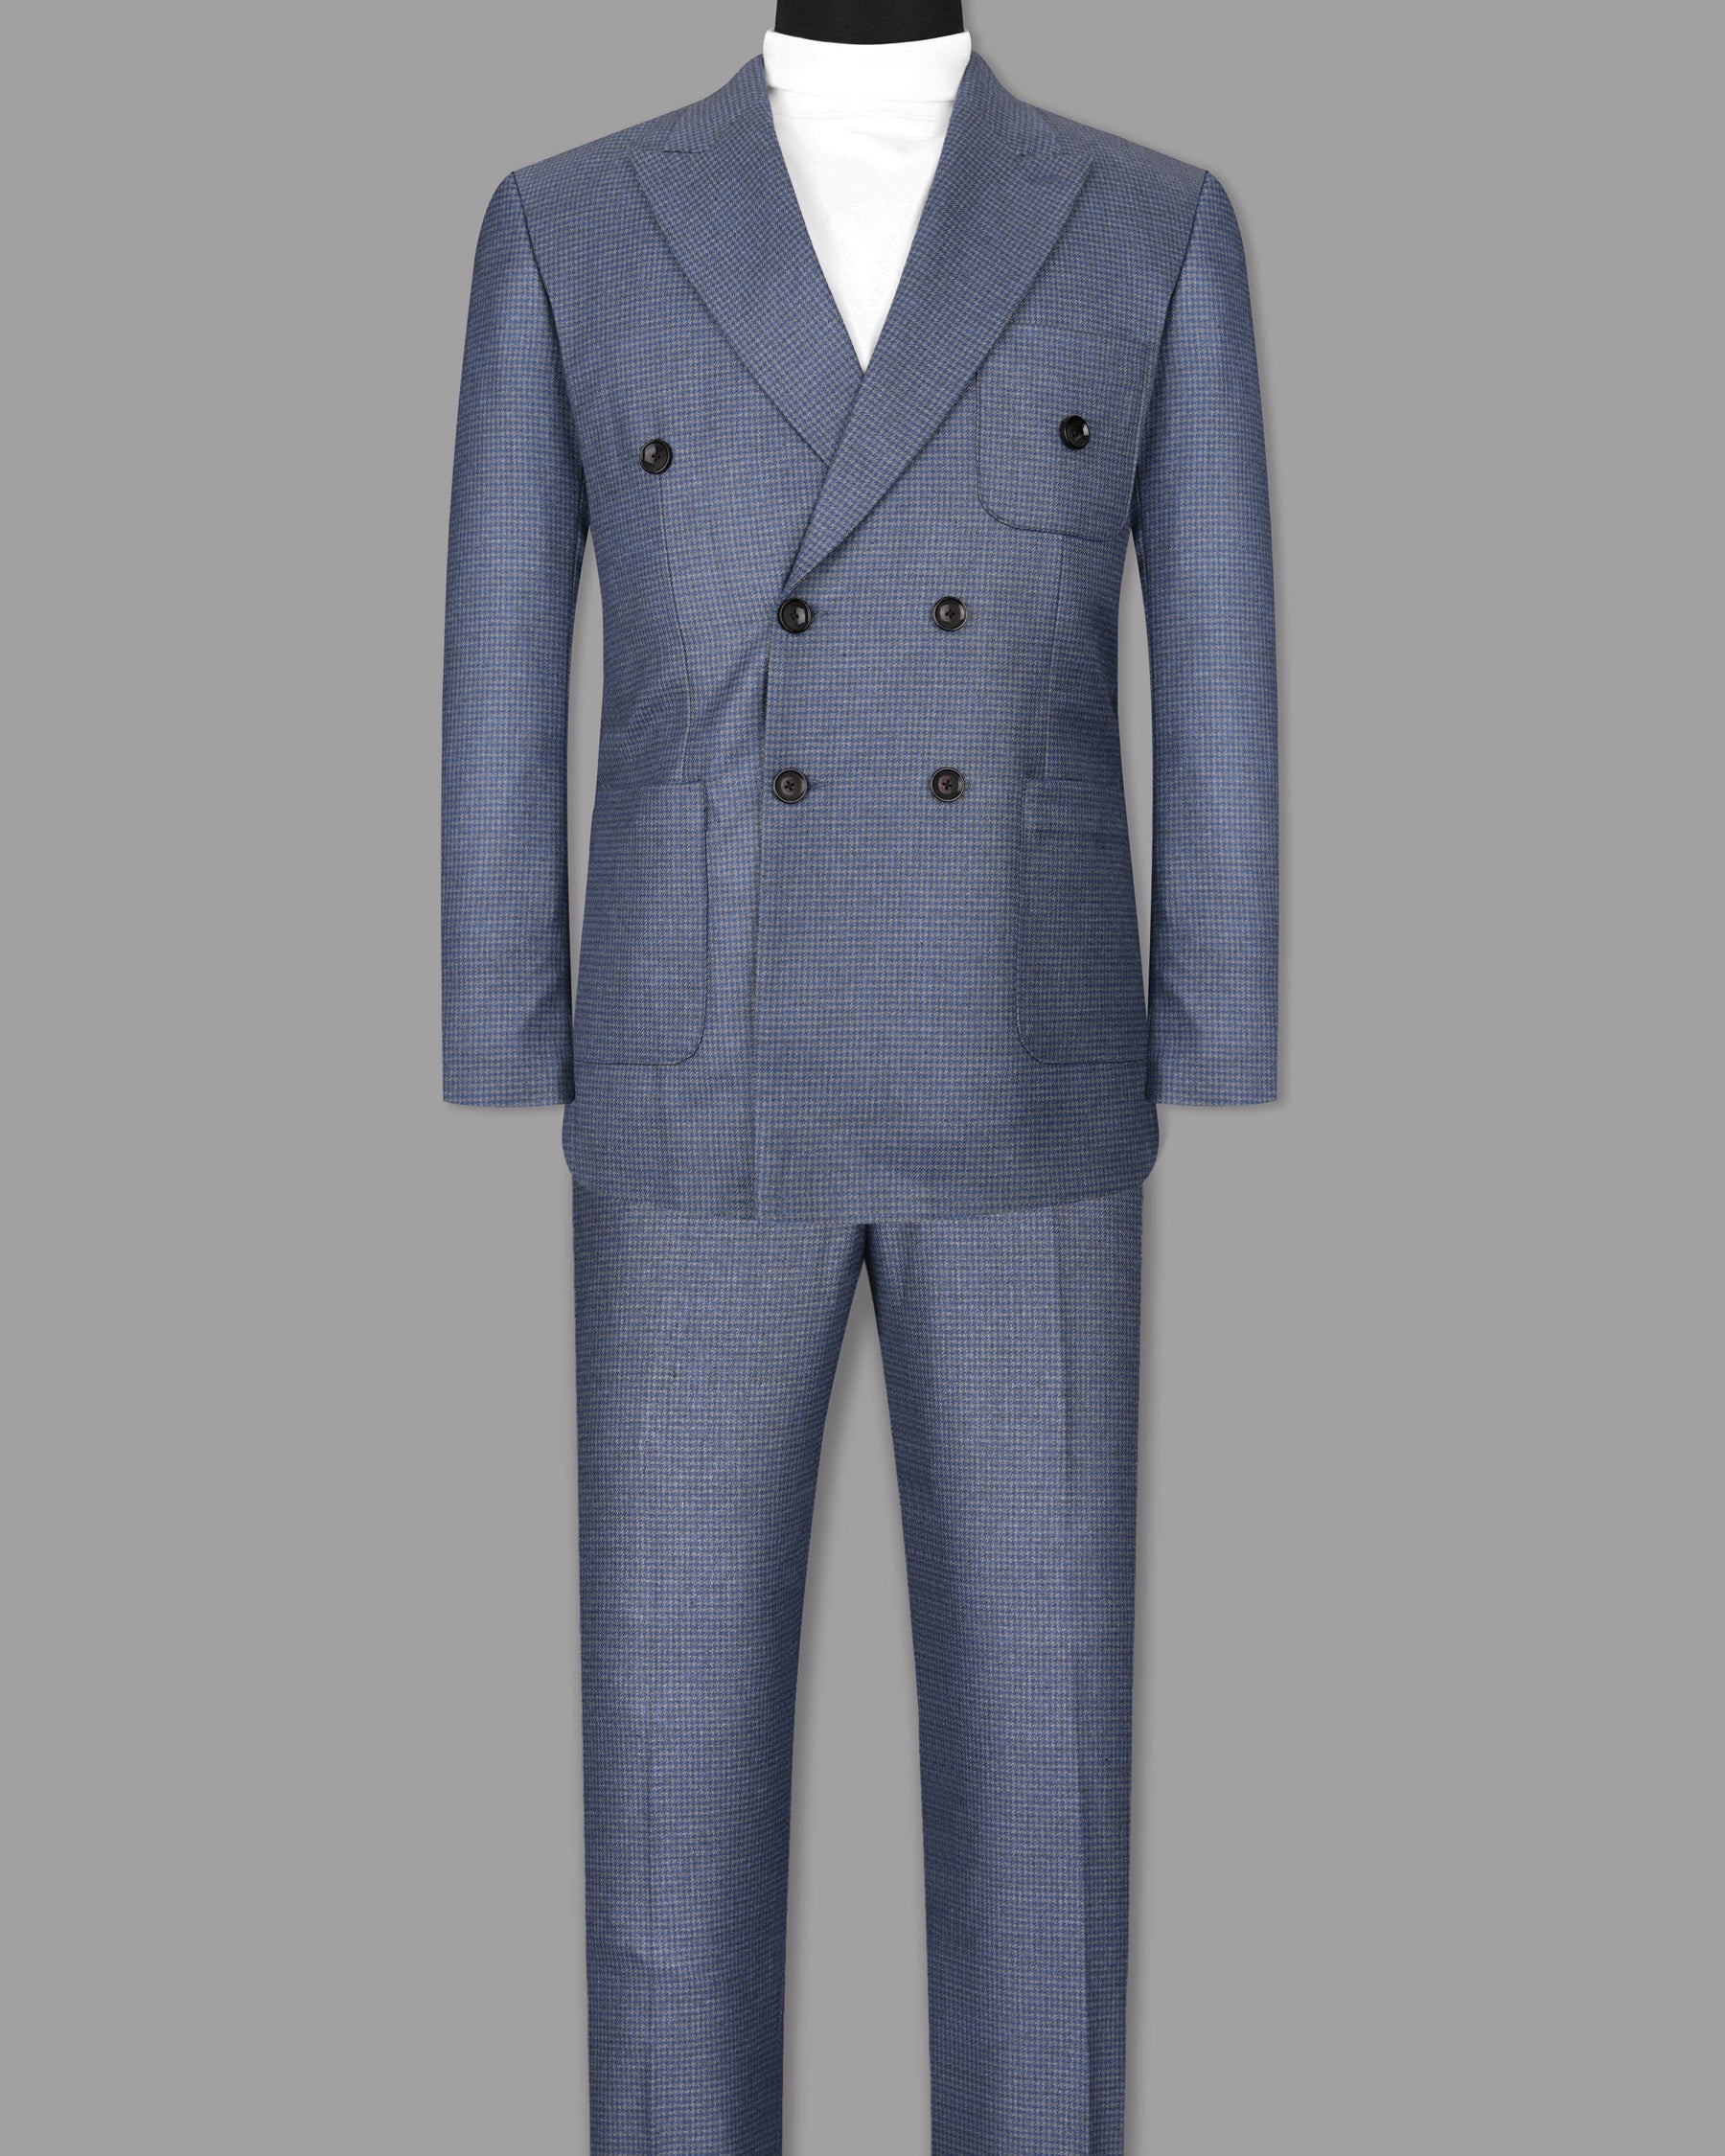 Soya Bean Grey with Rhino Blue Woolrich Herringbone Checked Double Breasted Sports Suit